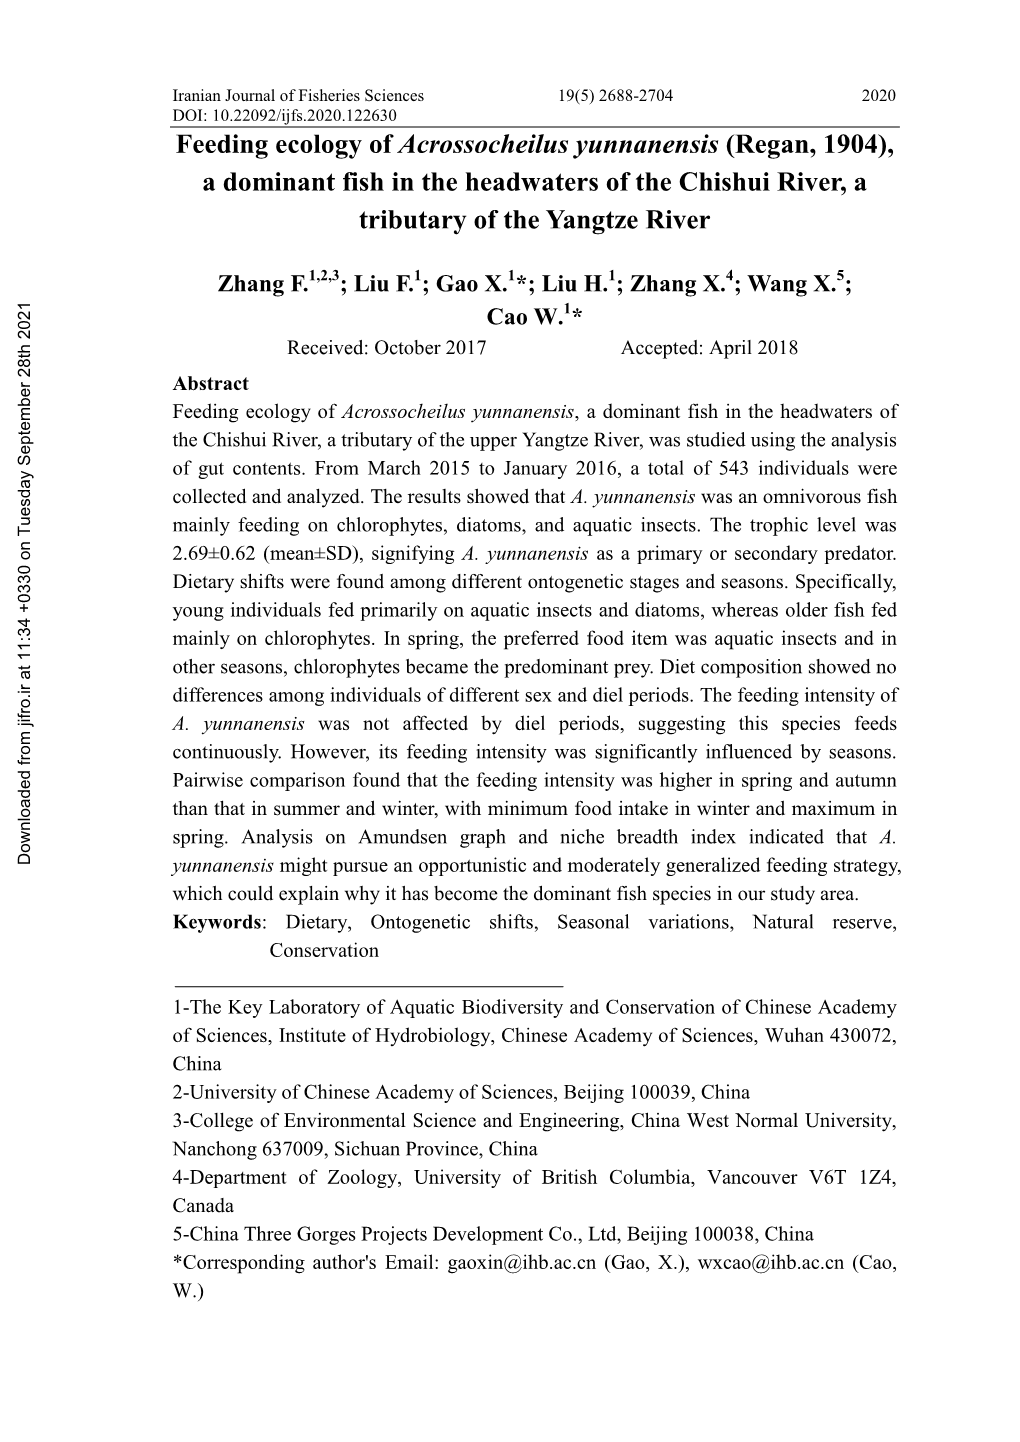 Feeding Ecology of Acrossocheilus Yunnanensis (Regan, 1904), a Dominant Fish in the Headwaters of the Chishui River, a Tributary of the Yangtze River